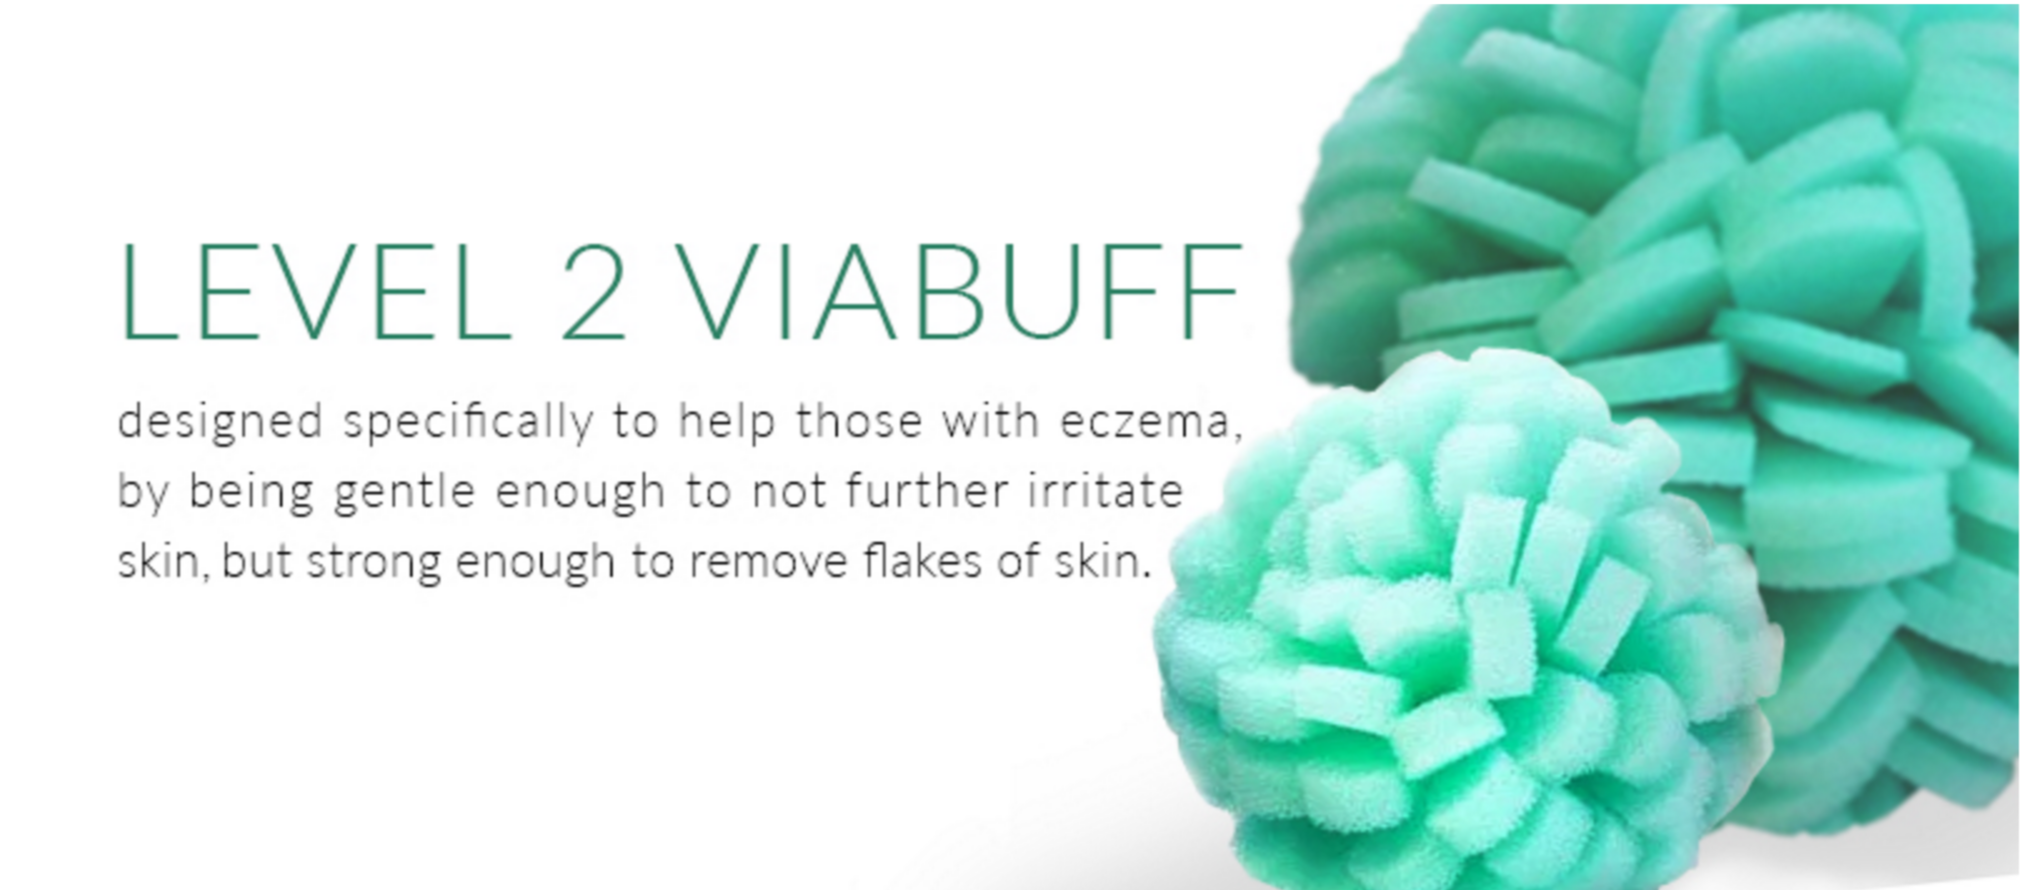 Our Guide to Exfoliating Eczema